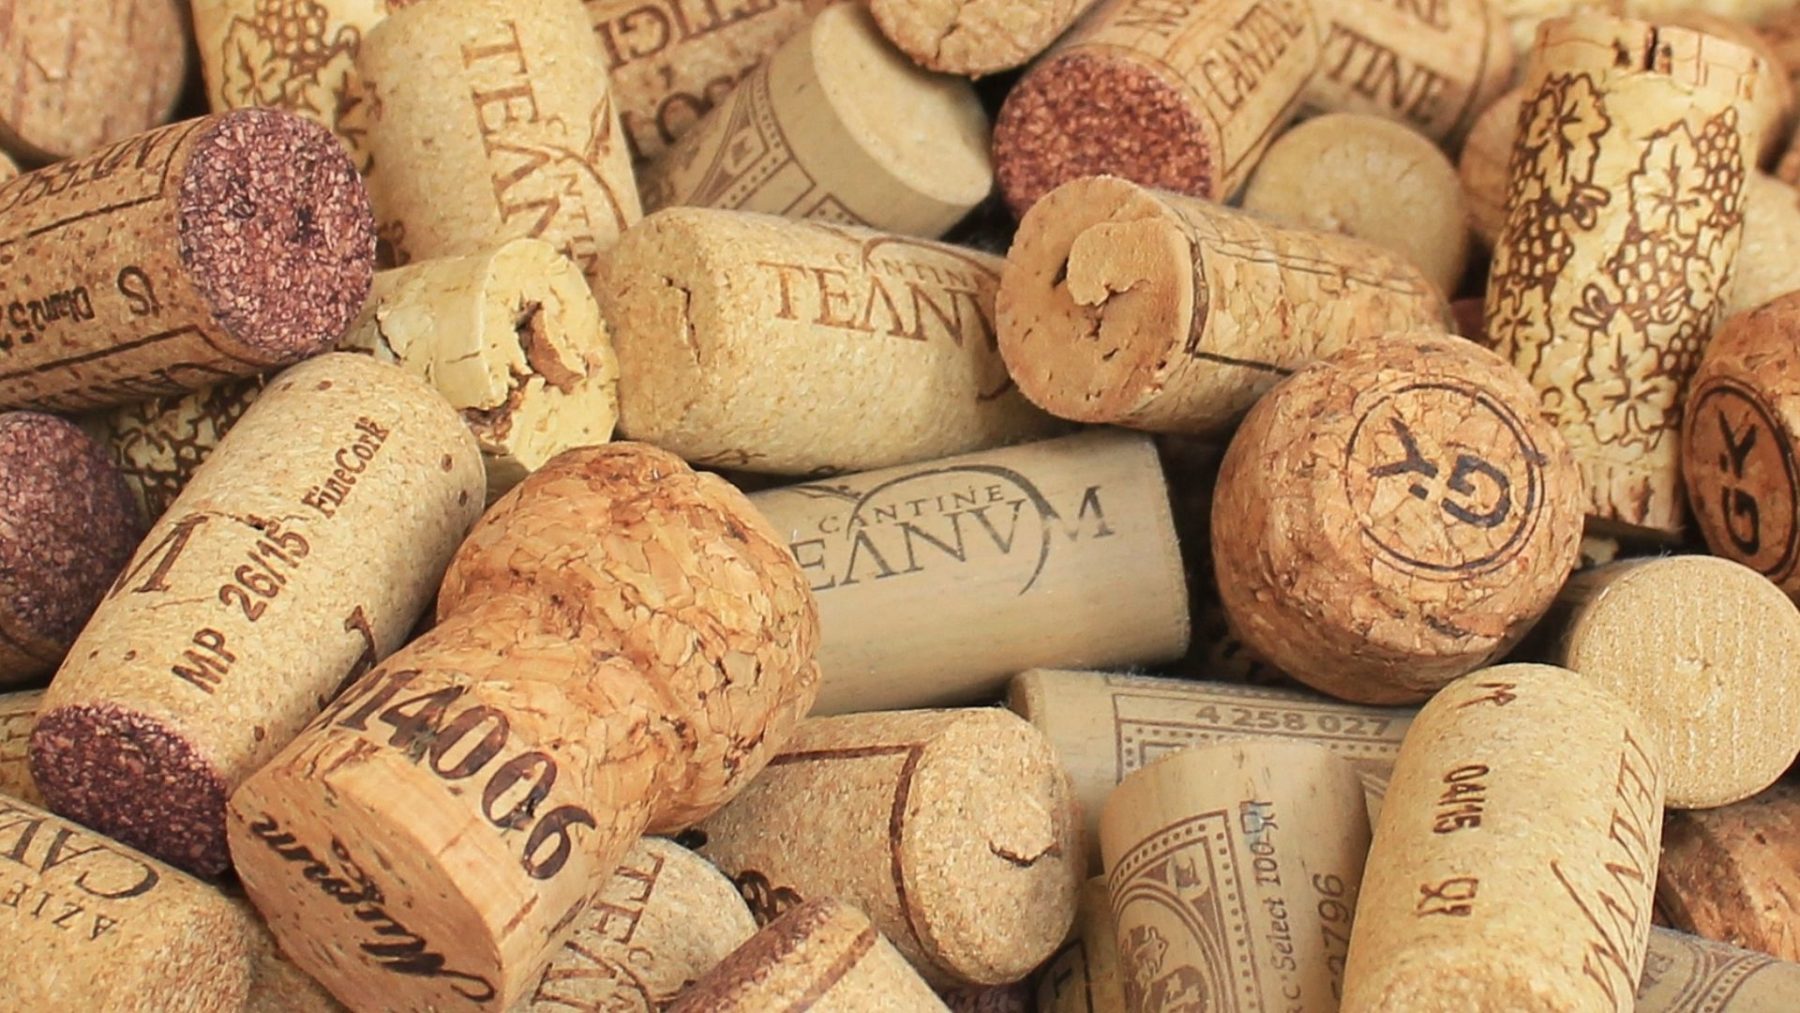 get creative with cork